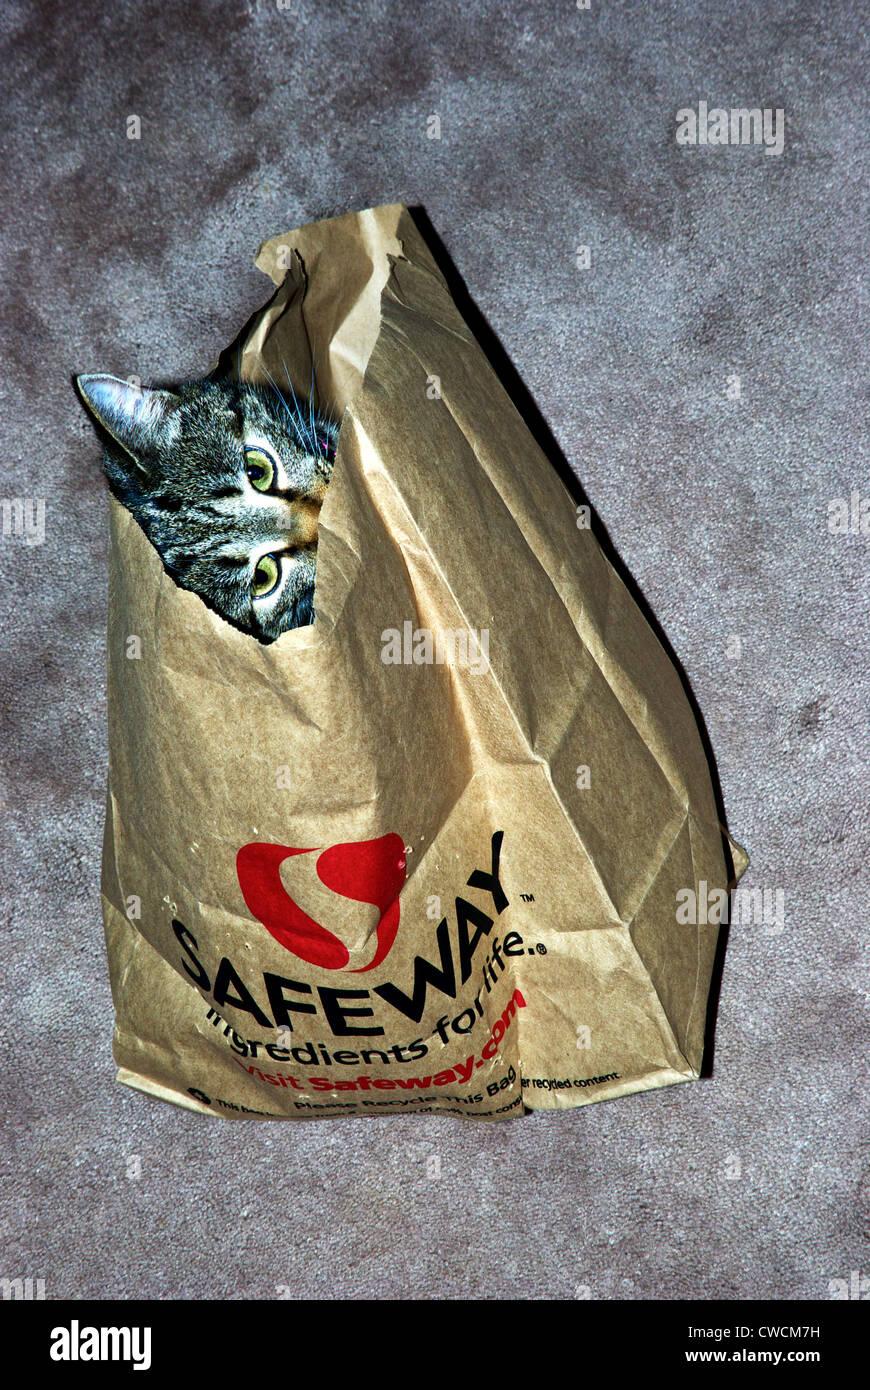 Recycled paper grocery shopping bag reused as free cat toy lair Stock Photo